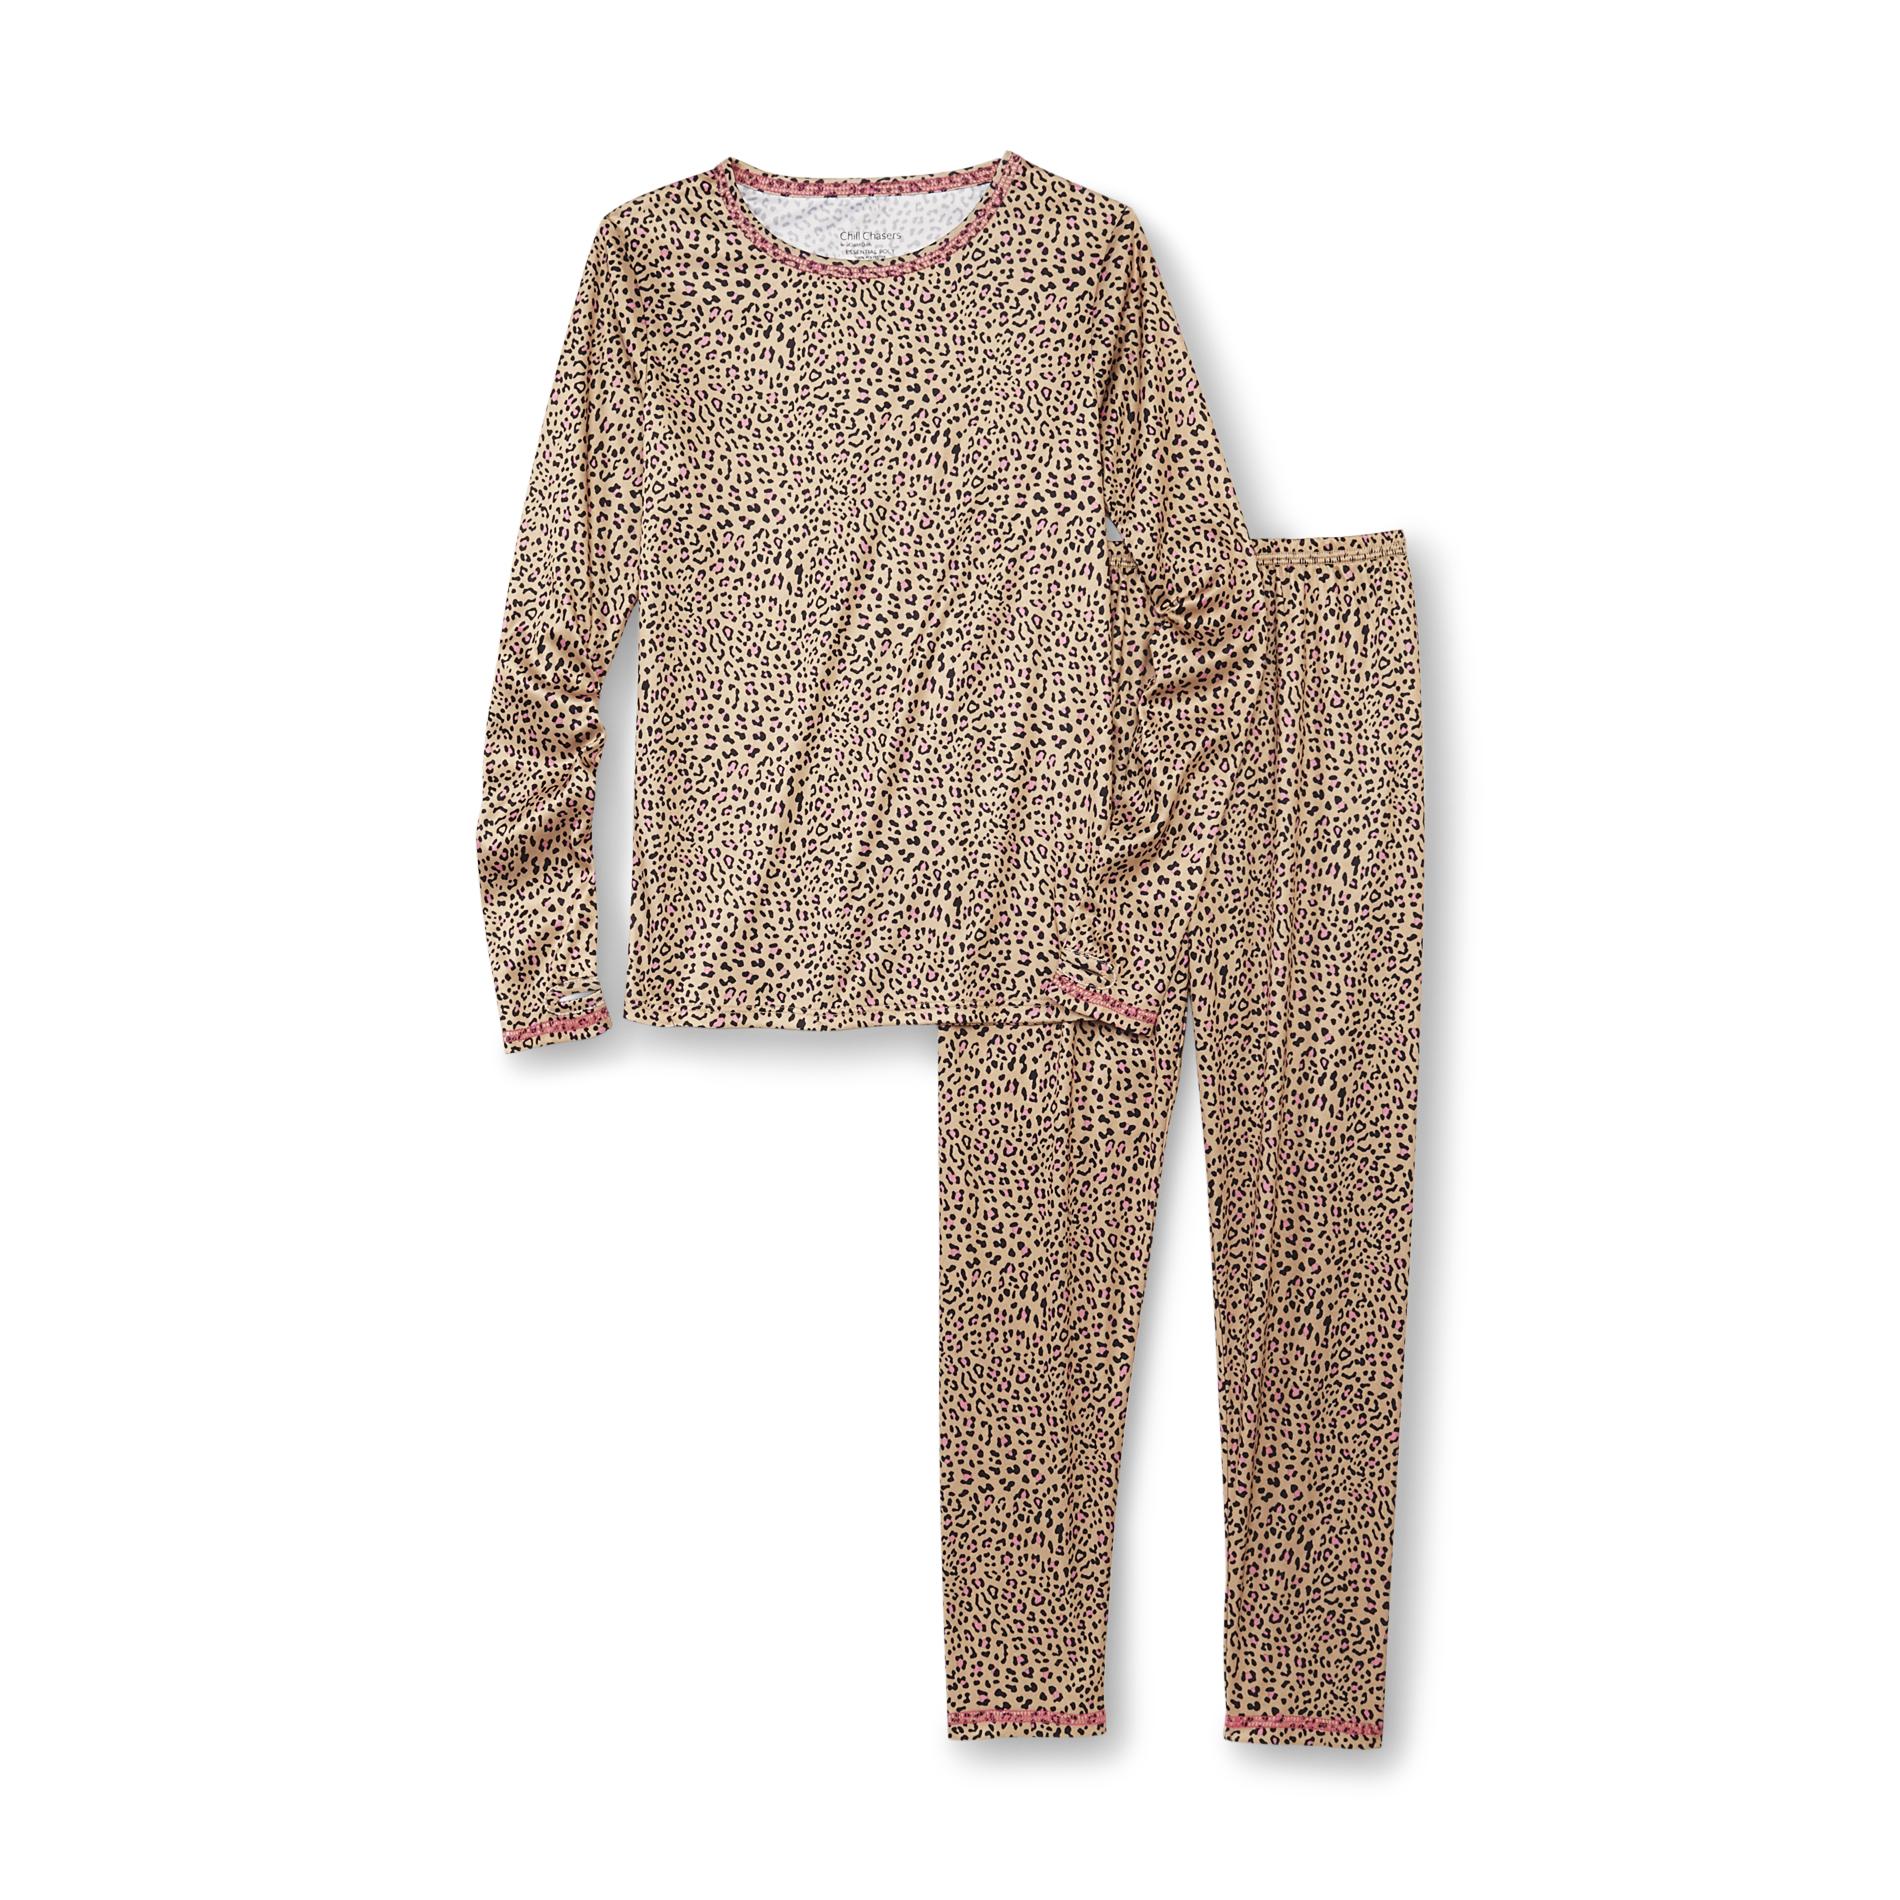 Chill Chasers Girl's Long-Sleeve Thermal Shirt & Pants - Leopard Print